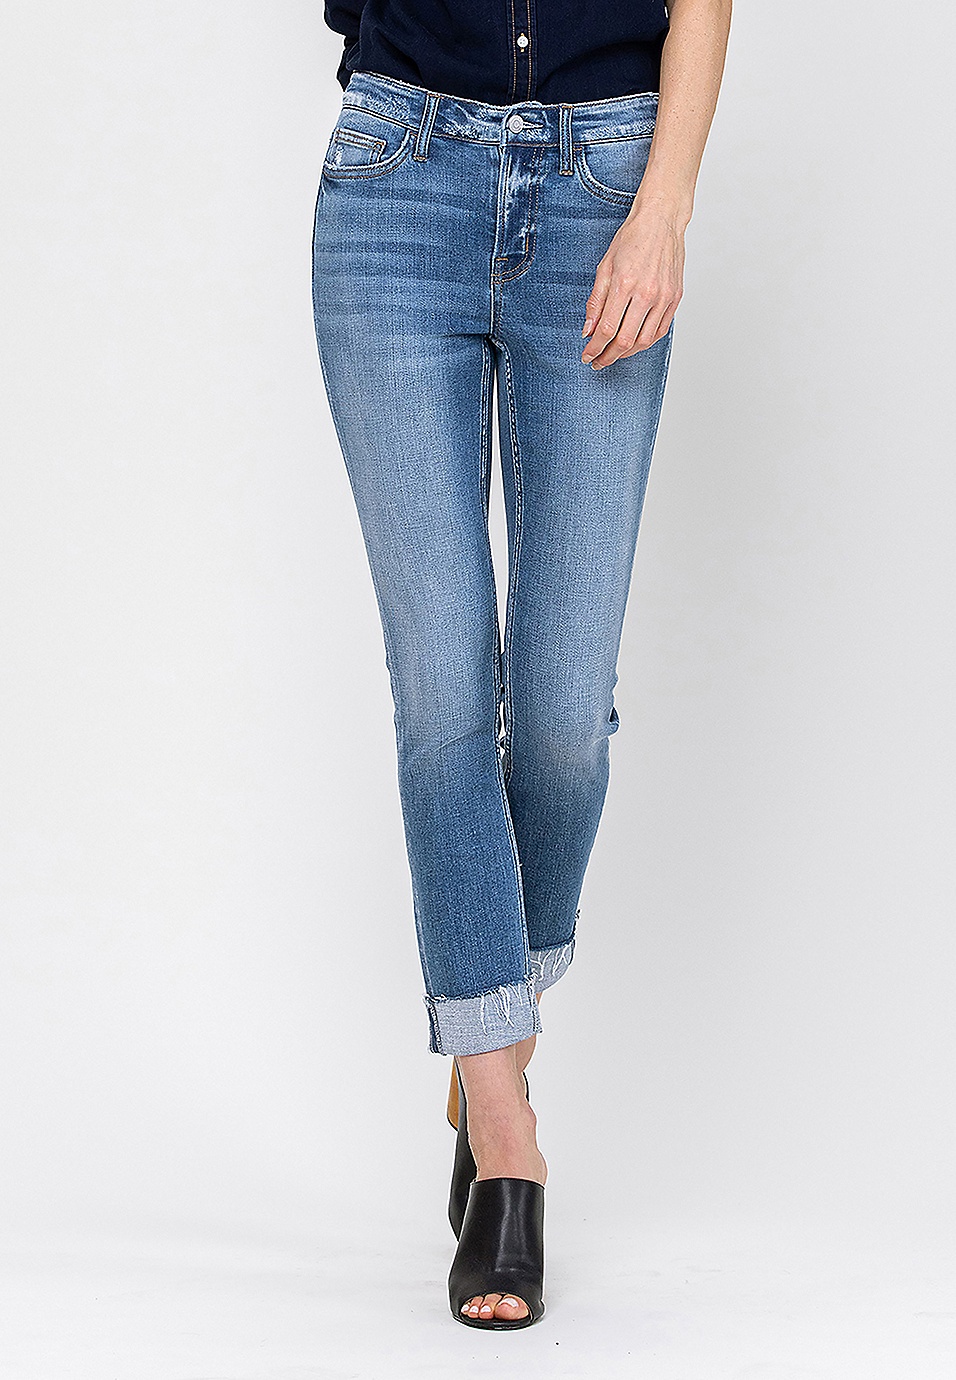 Flying Monkey Ultra High Rise Straight Jean - Women's Jeans in Make A Move